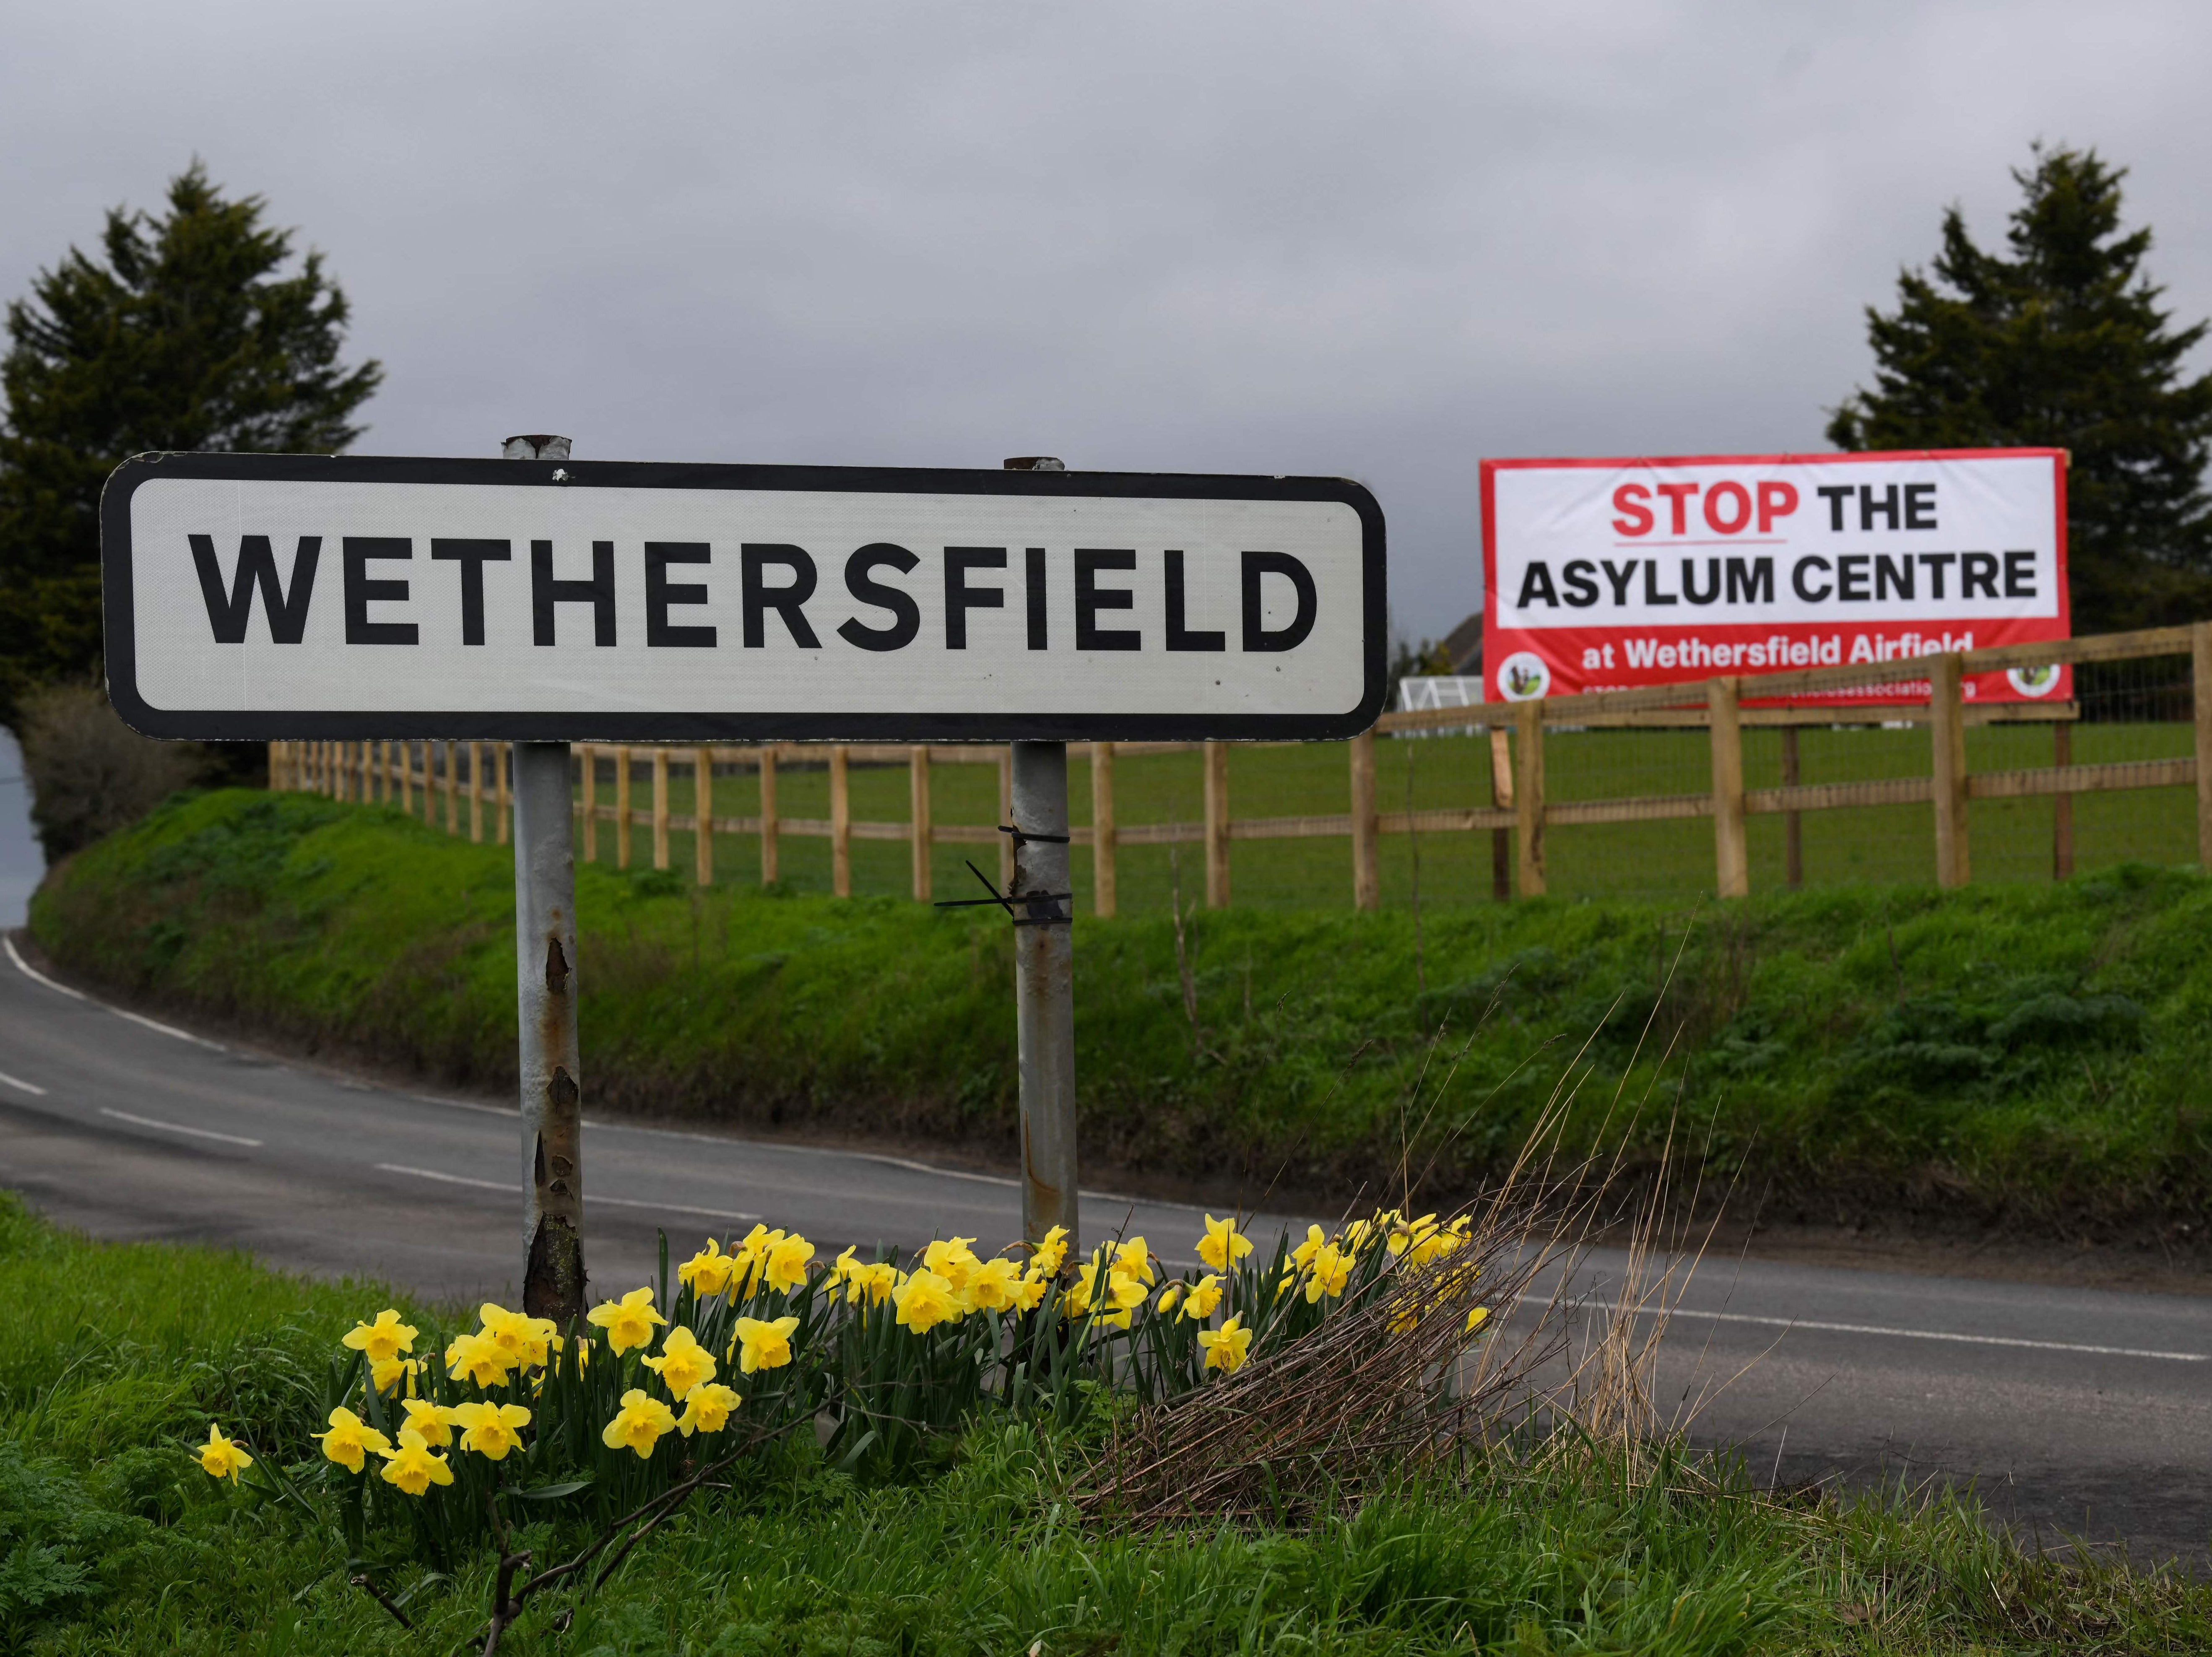 There have been protests locally over the use of the former RAF base for an asylume seekers accommodation centre